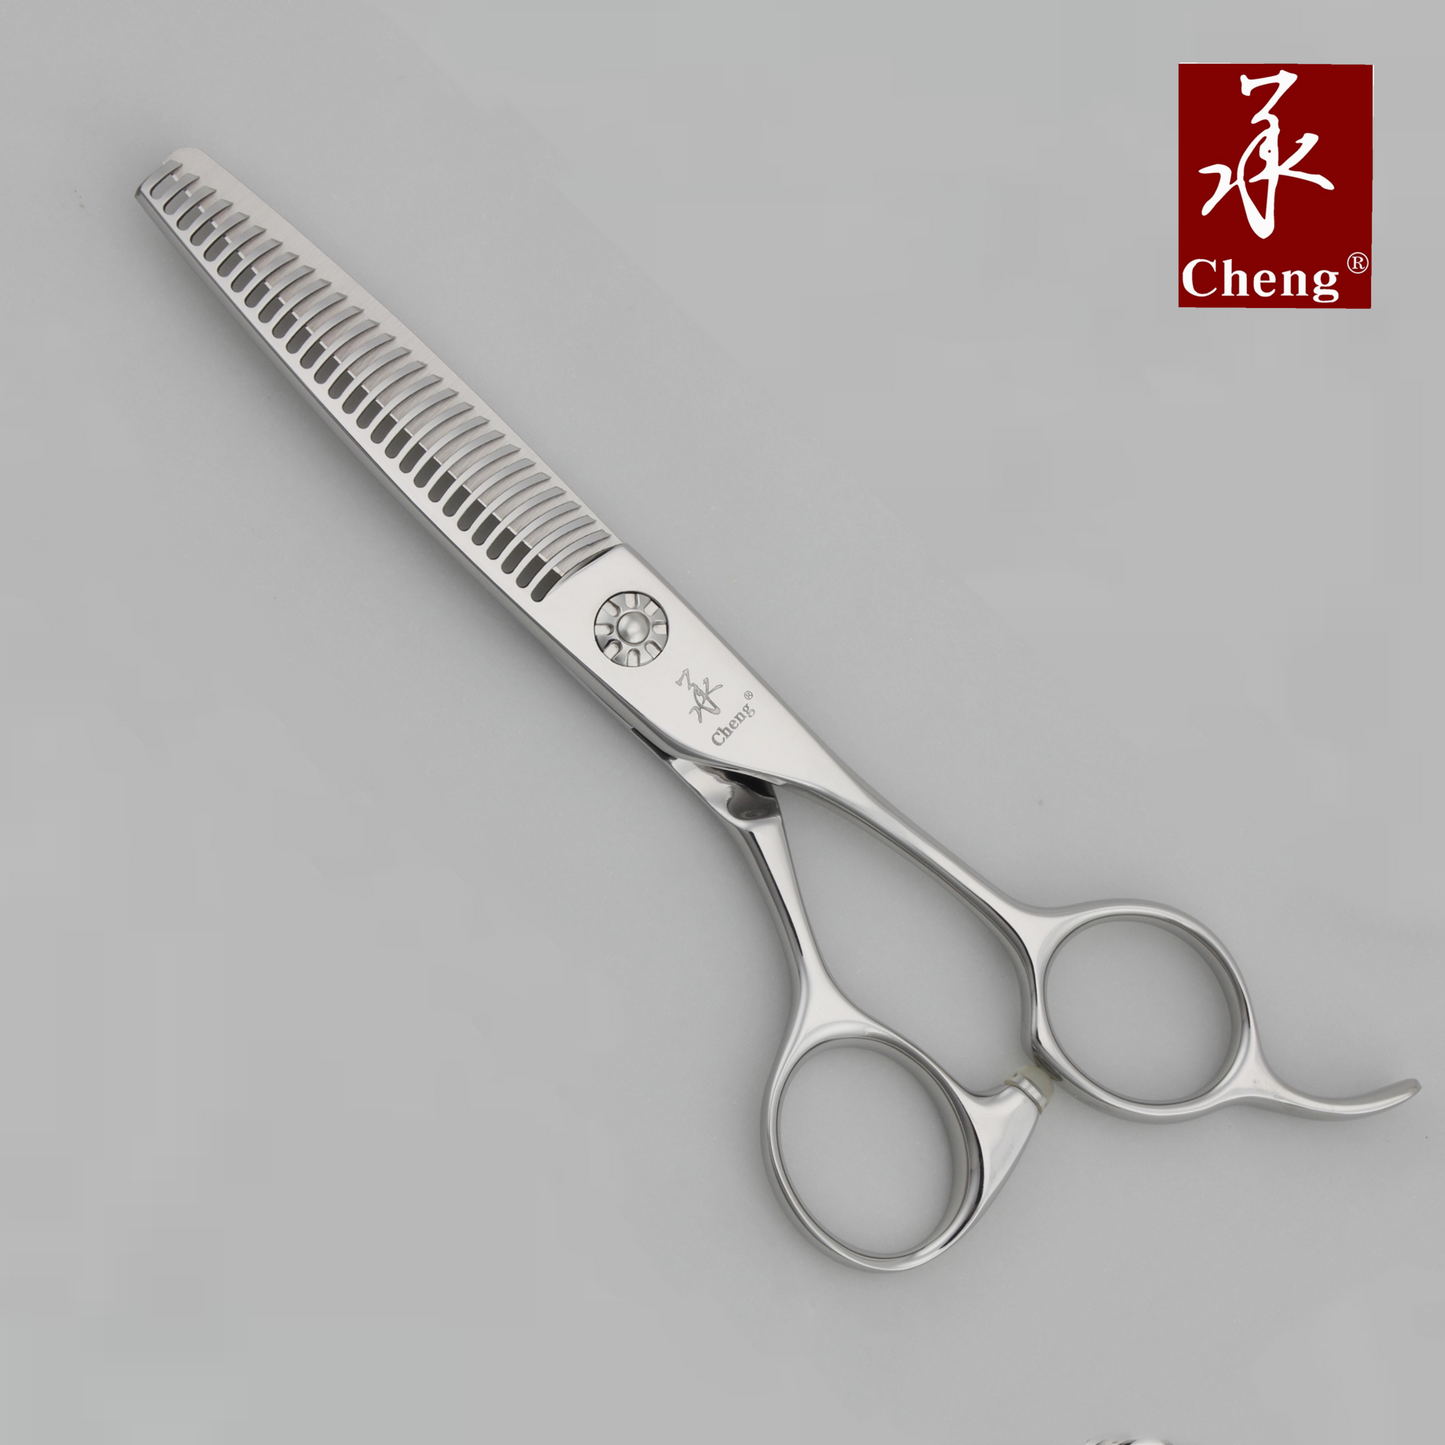 BF-635C 6.0 Inch 35T Hair Thining Shears Salon Shears Scissors About=35%